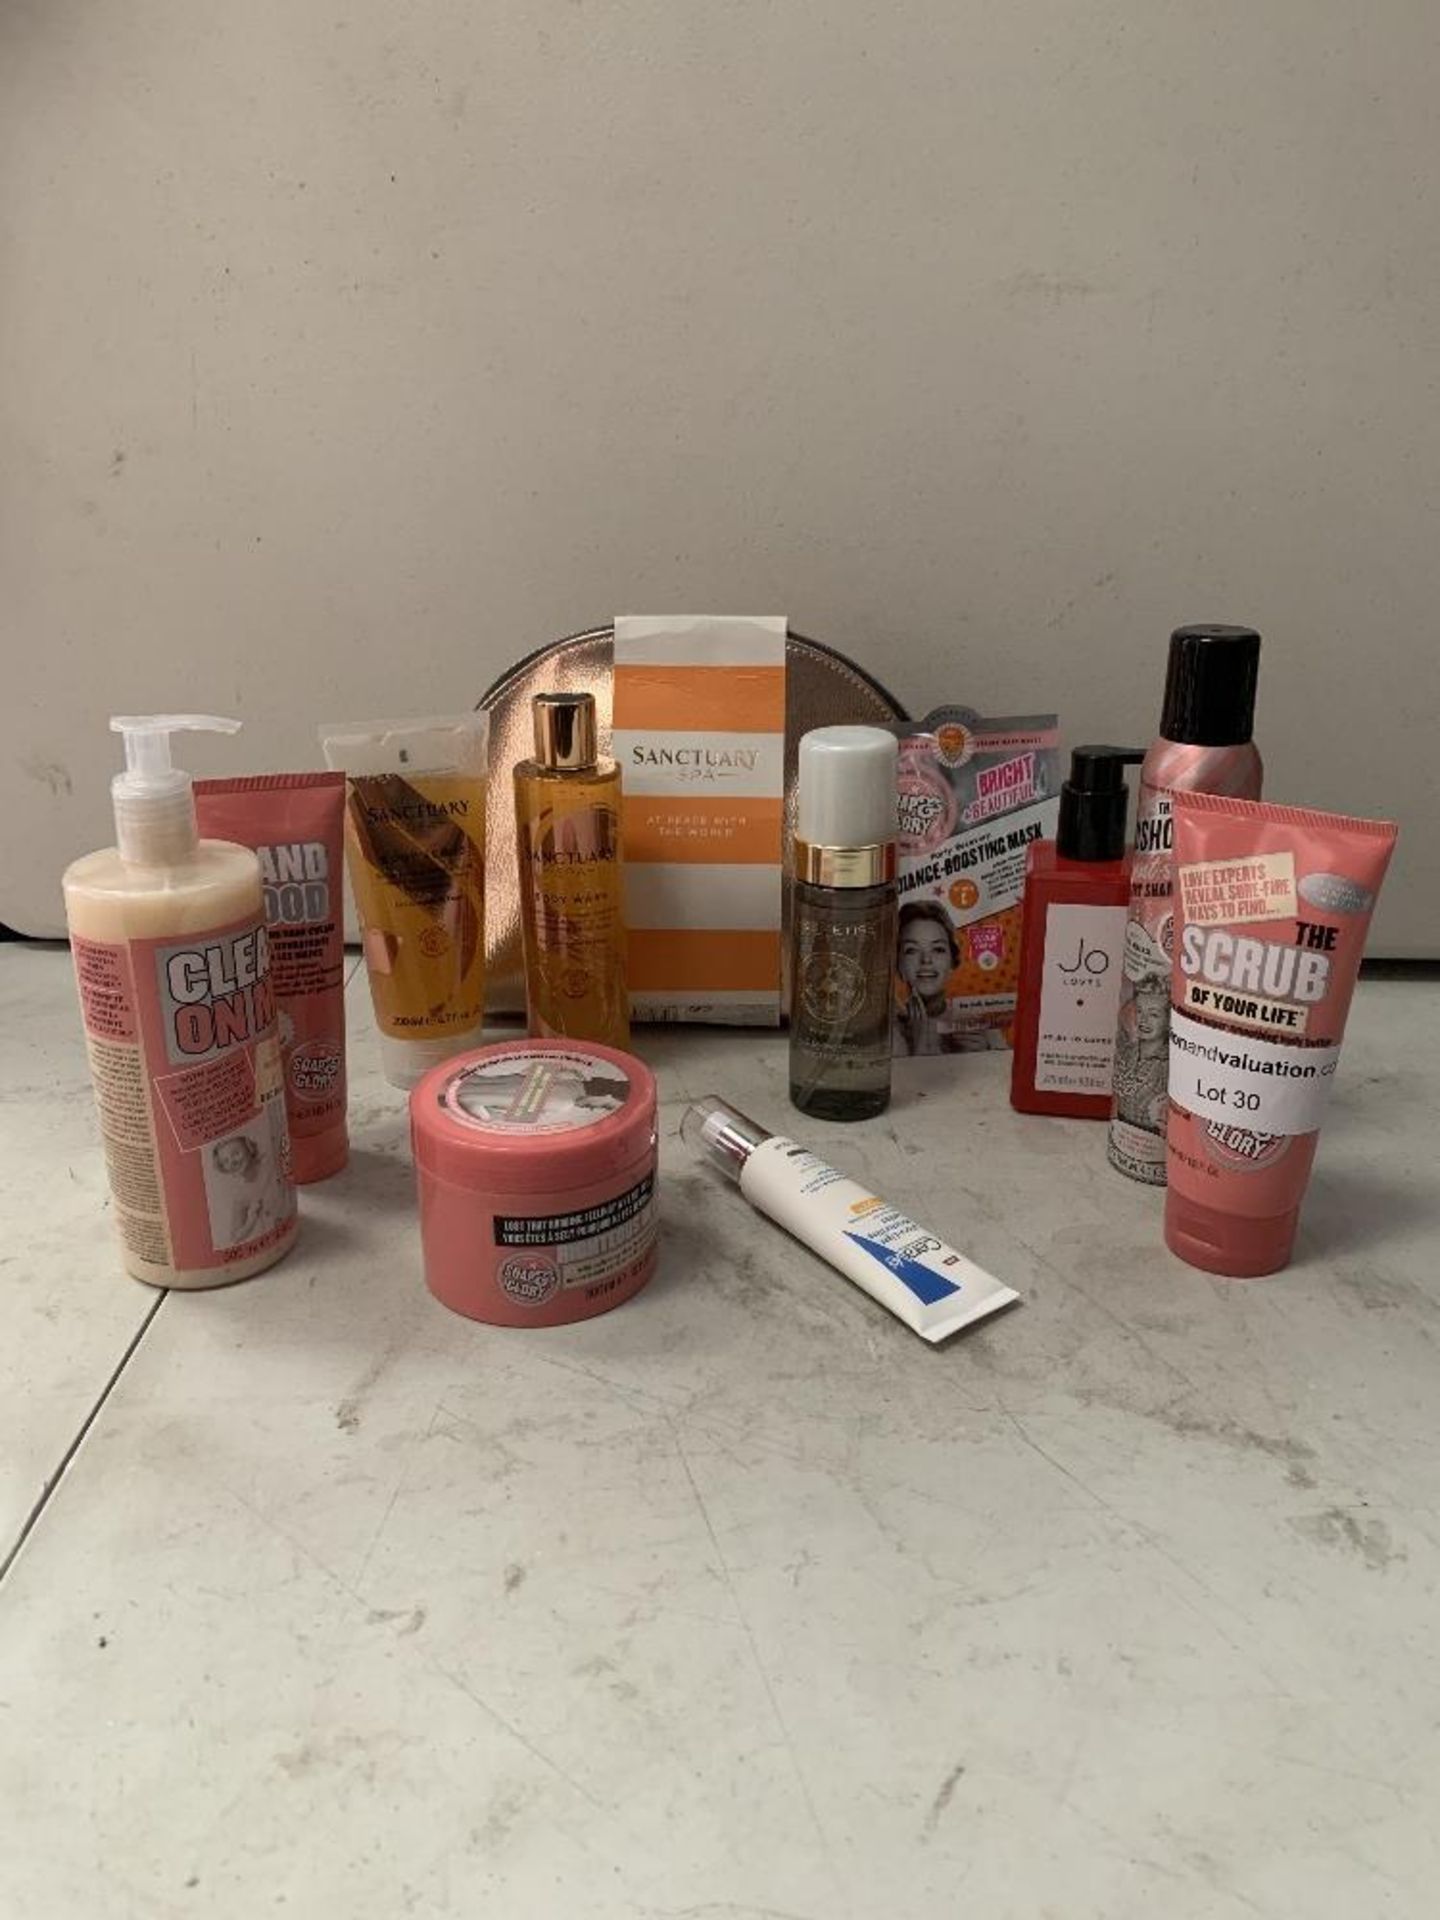 Beauty products sealed to include; Soap & Glory The righteous butter 300ml, Soap & Glory Hand food